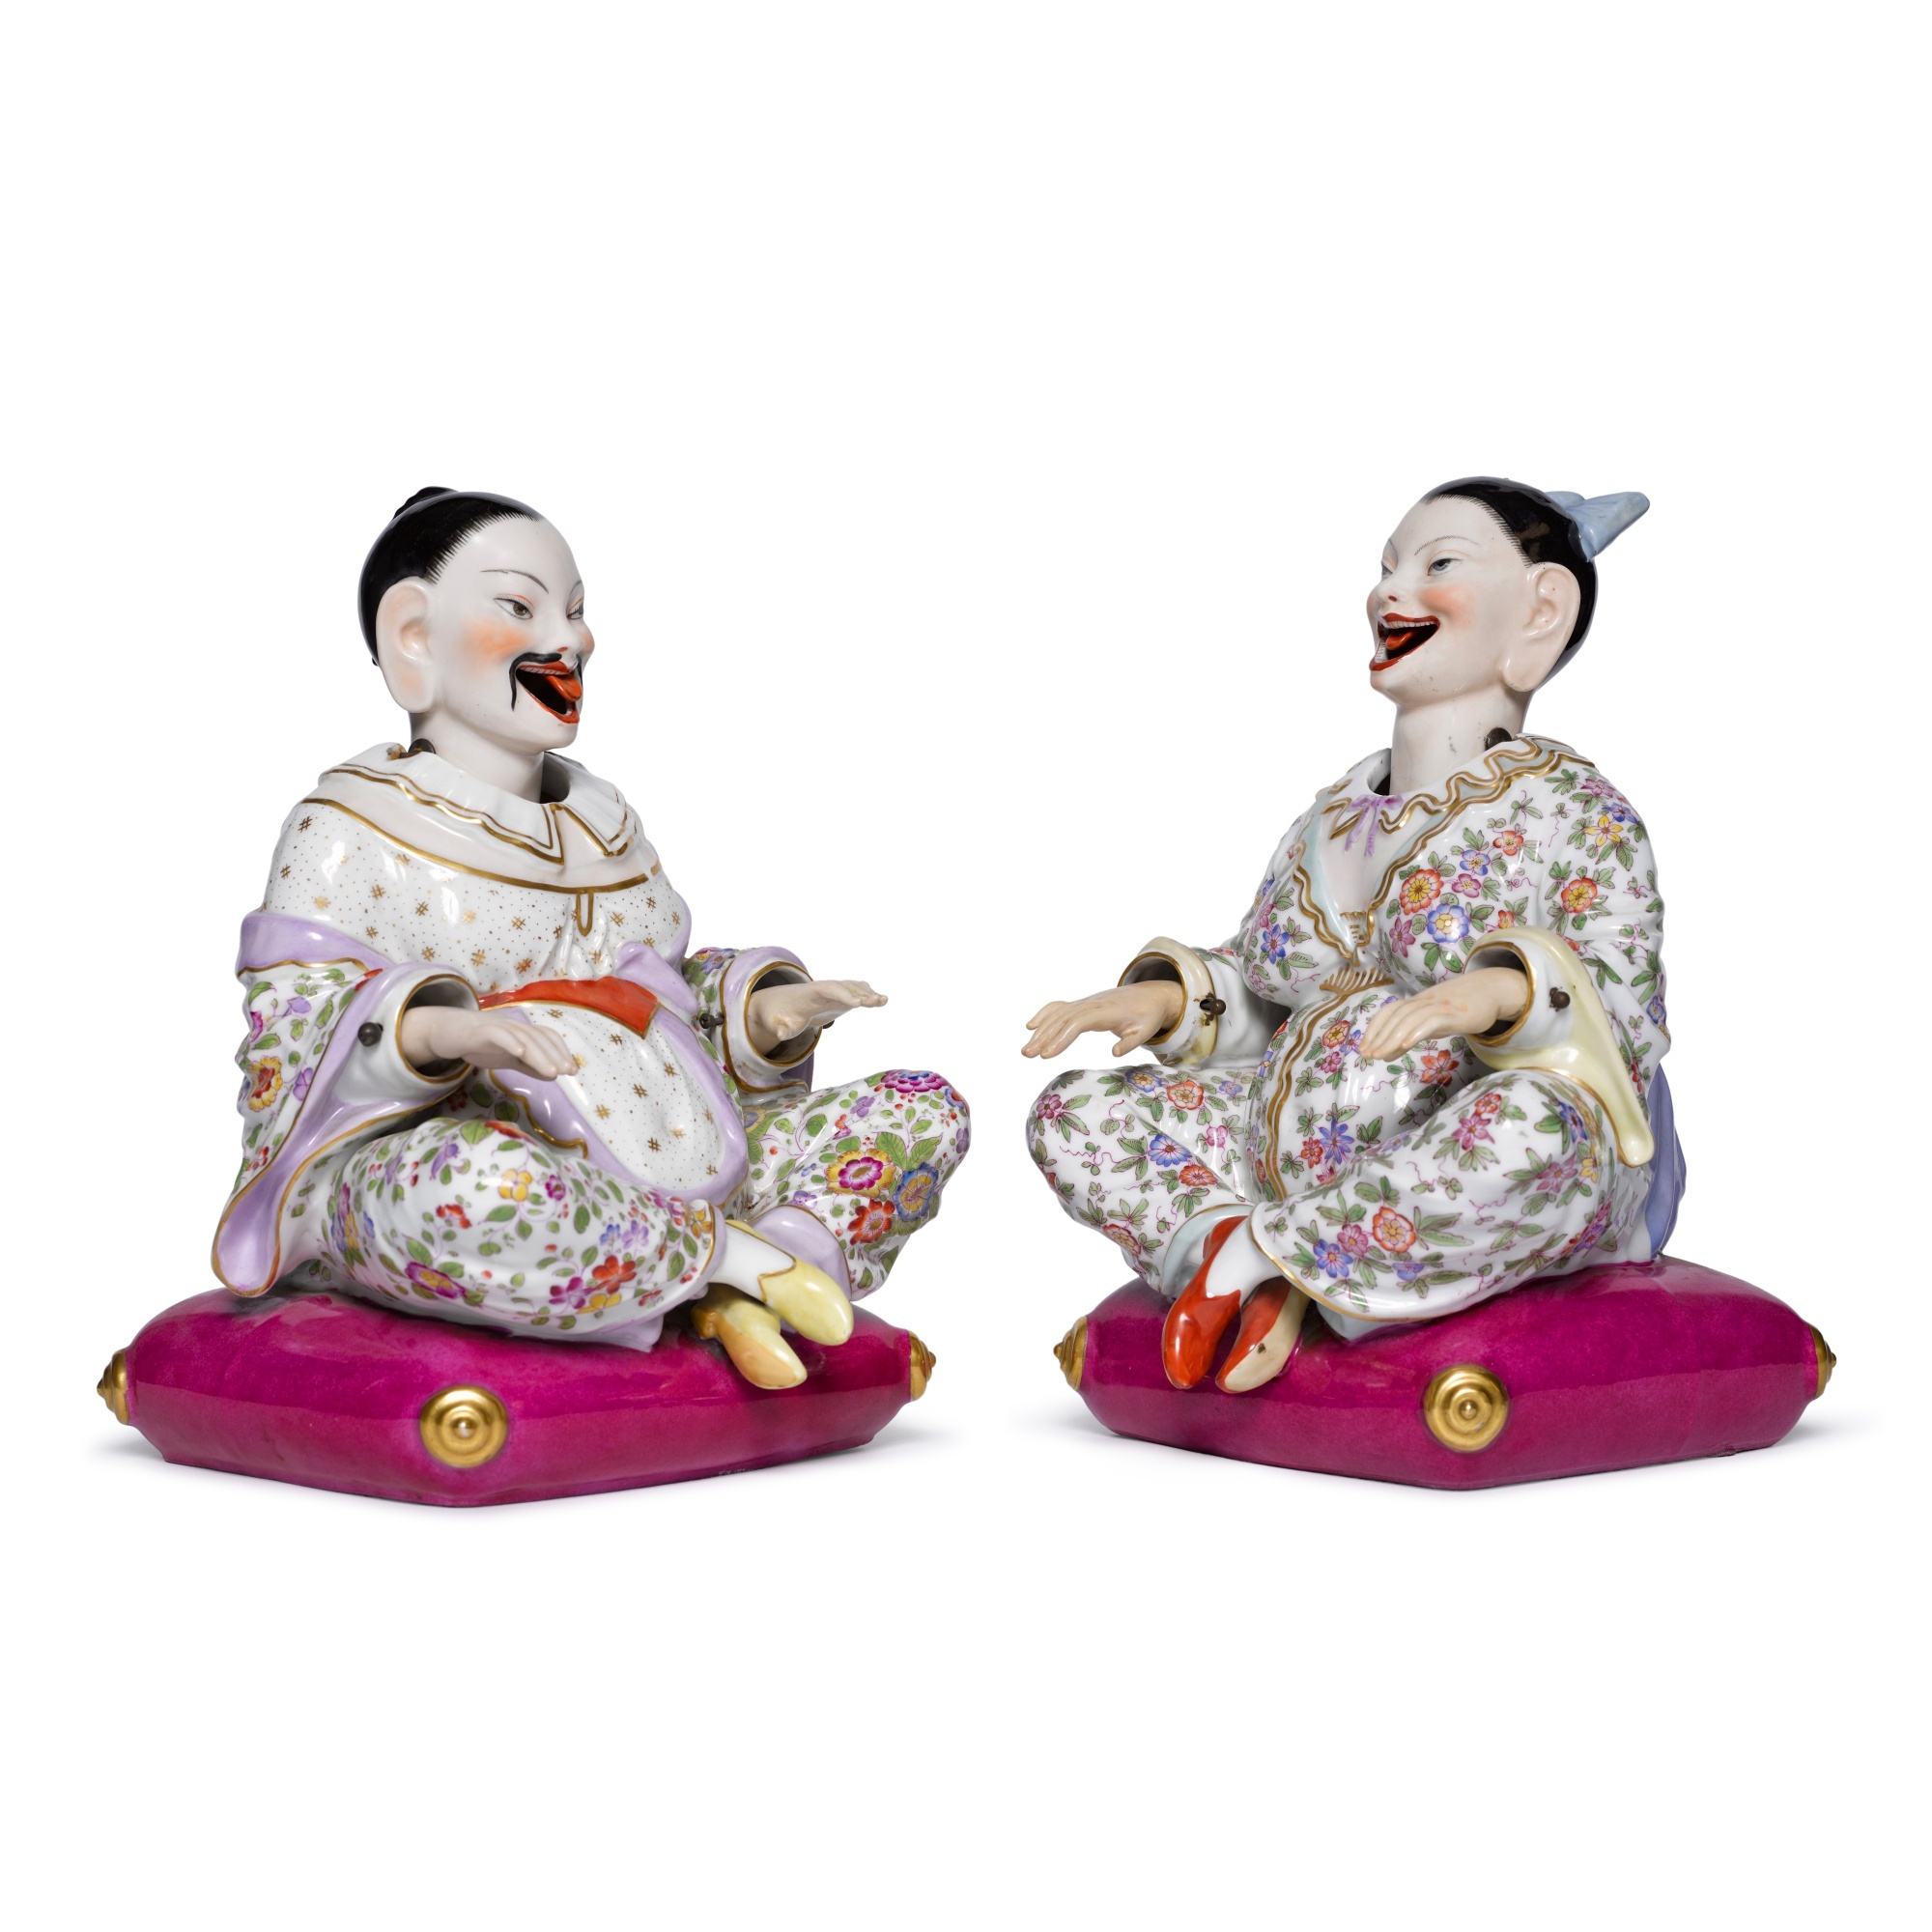 A Pair of French Porcelain Nodding Pagoda Figures, Circa 1890 - Image 2 of 4